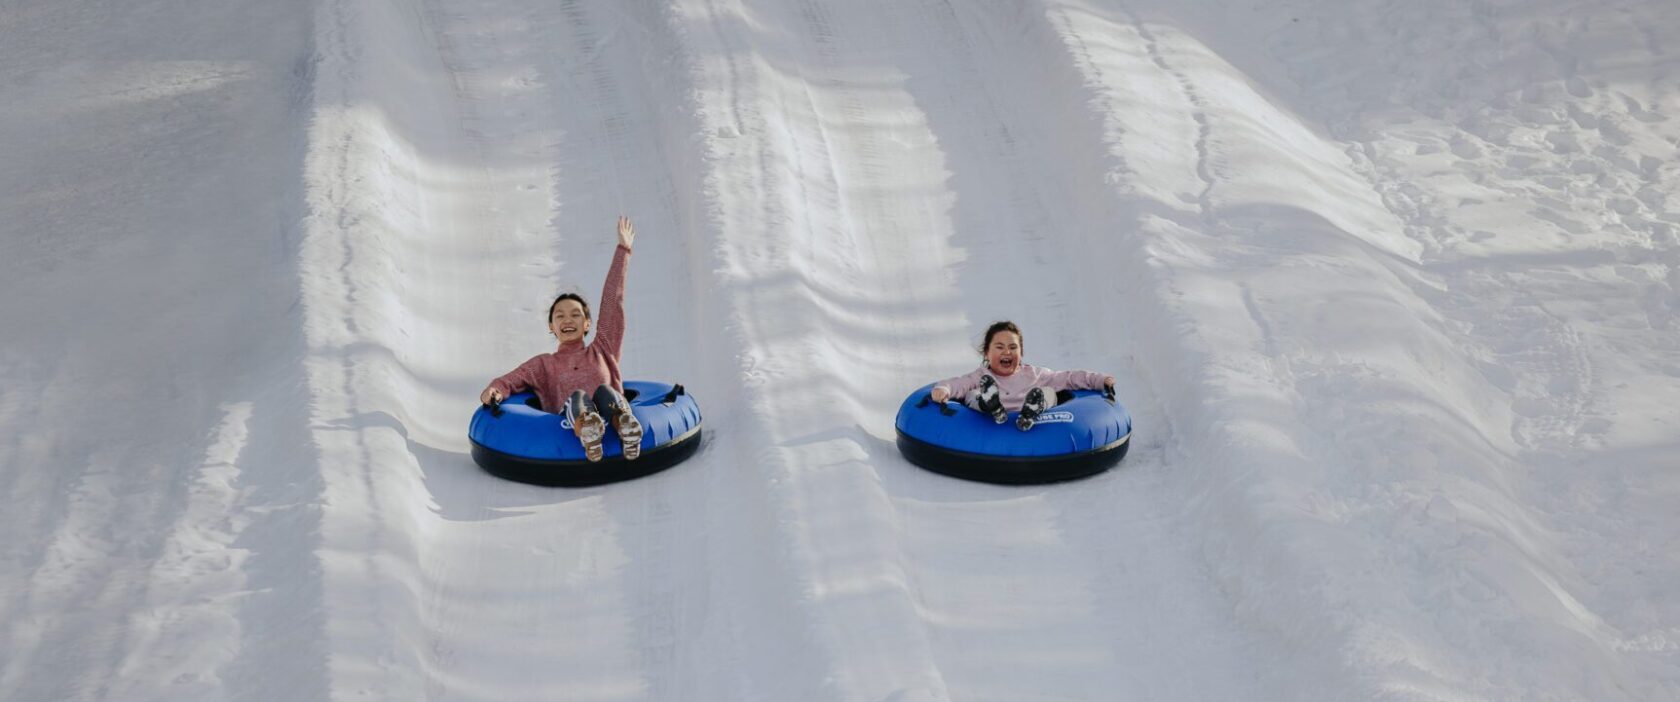 Snow Tubing for All Ages at Mohonk